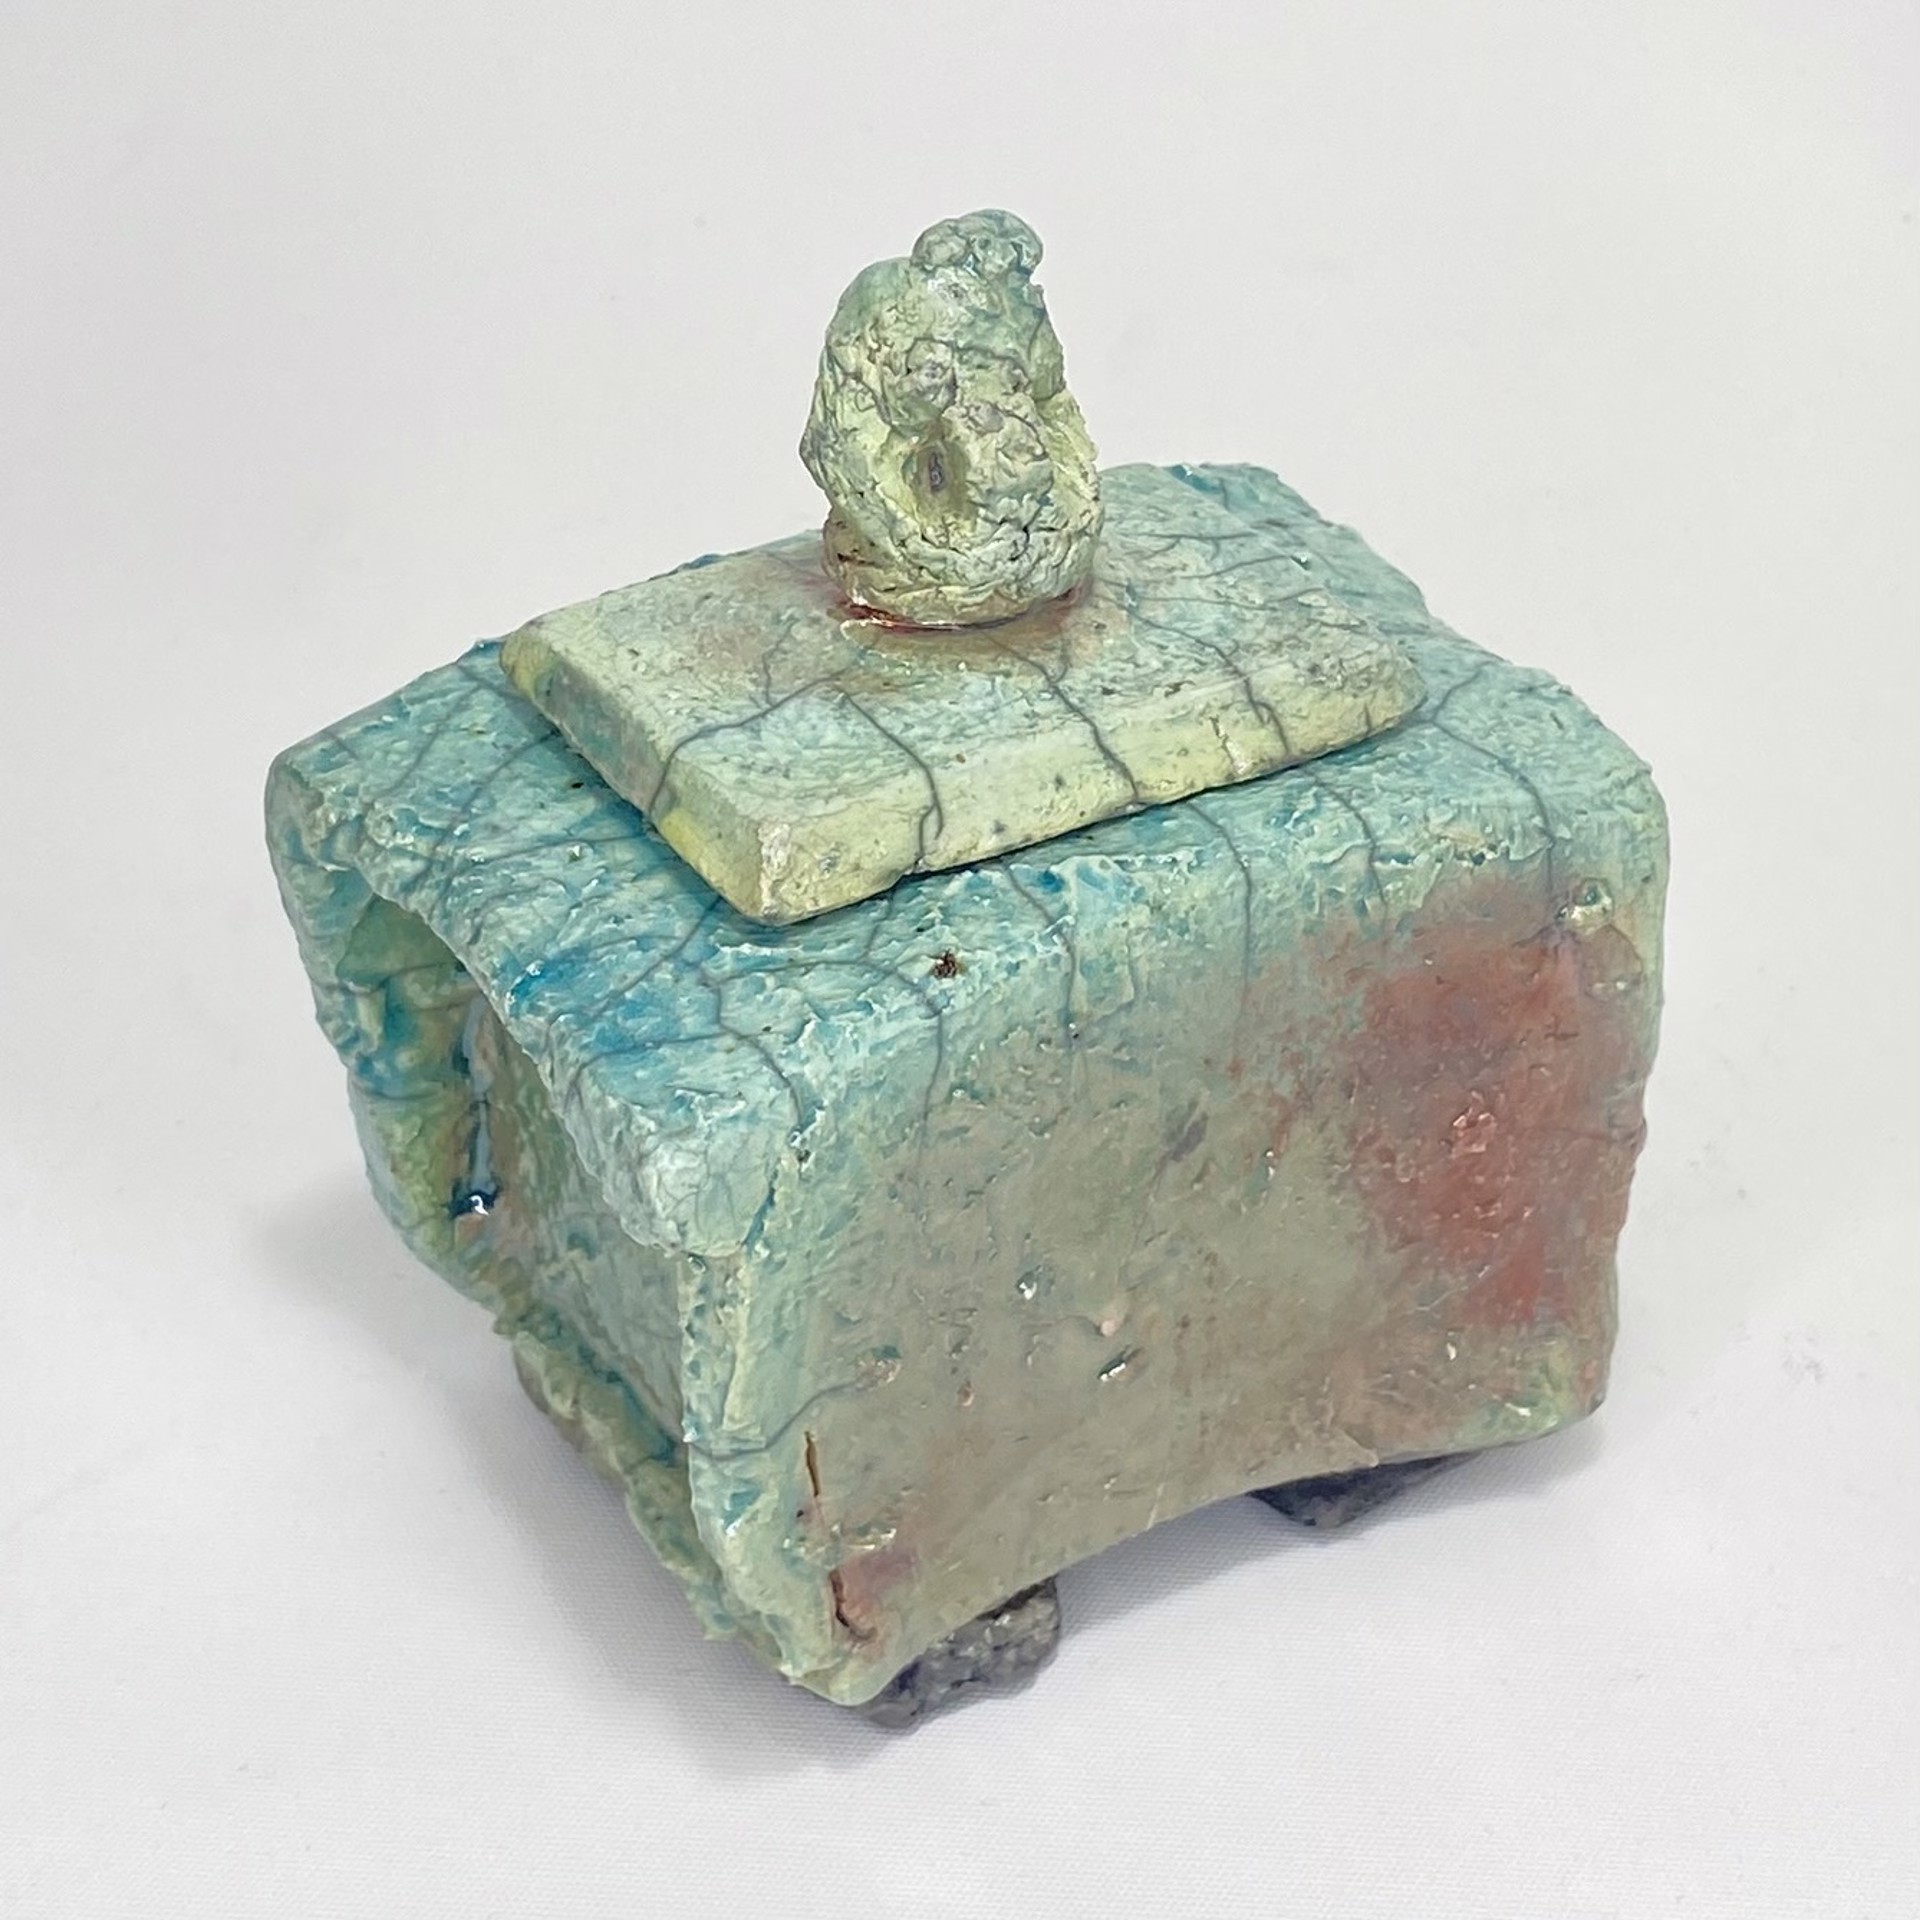 Turquoise Box II by Wally Asselberghs